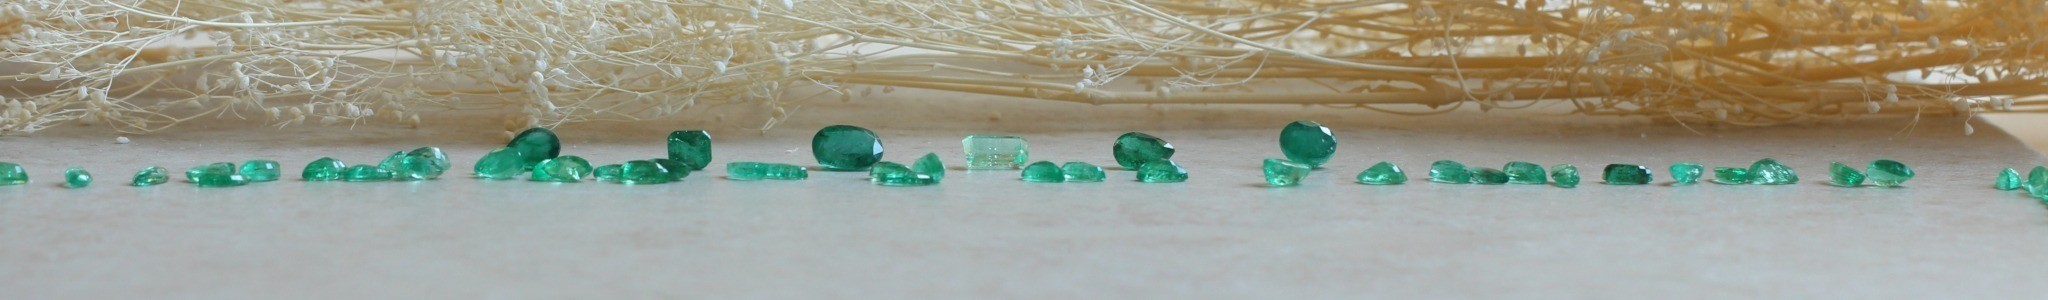 Emerald Product Line Image